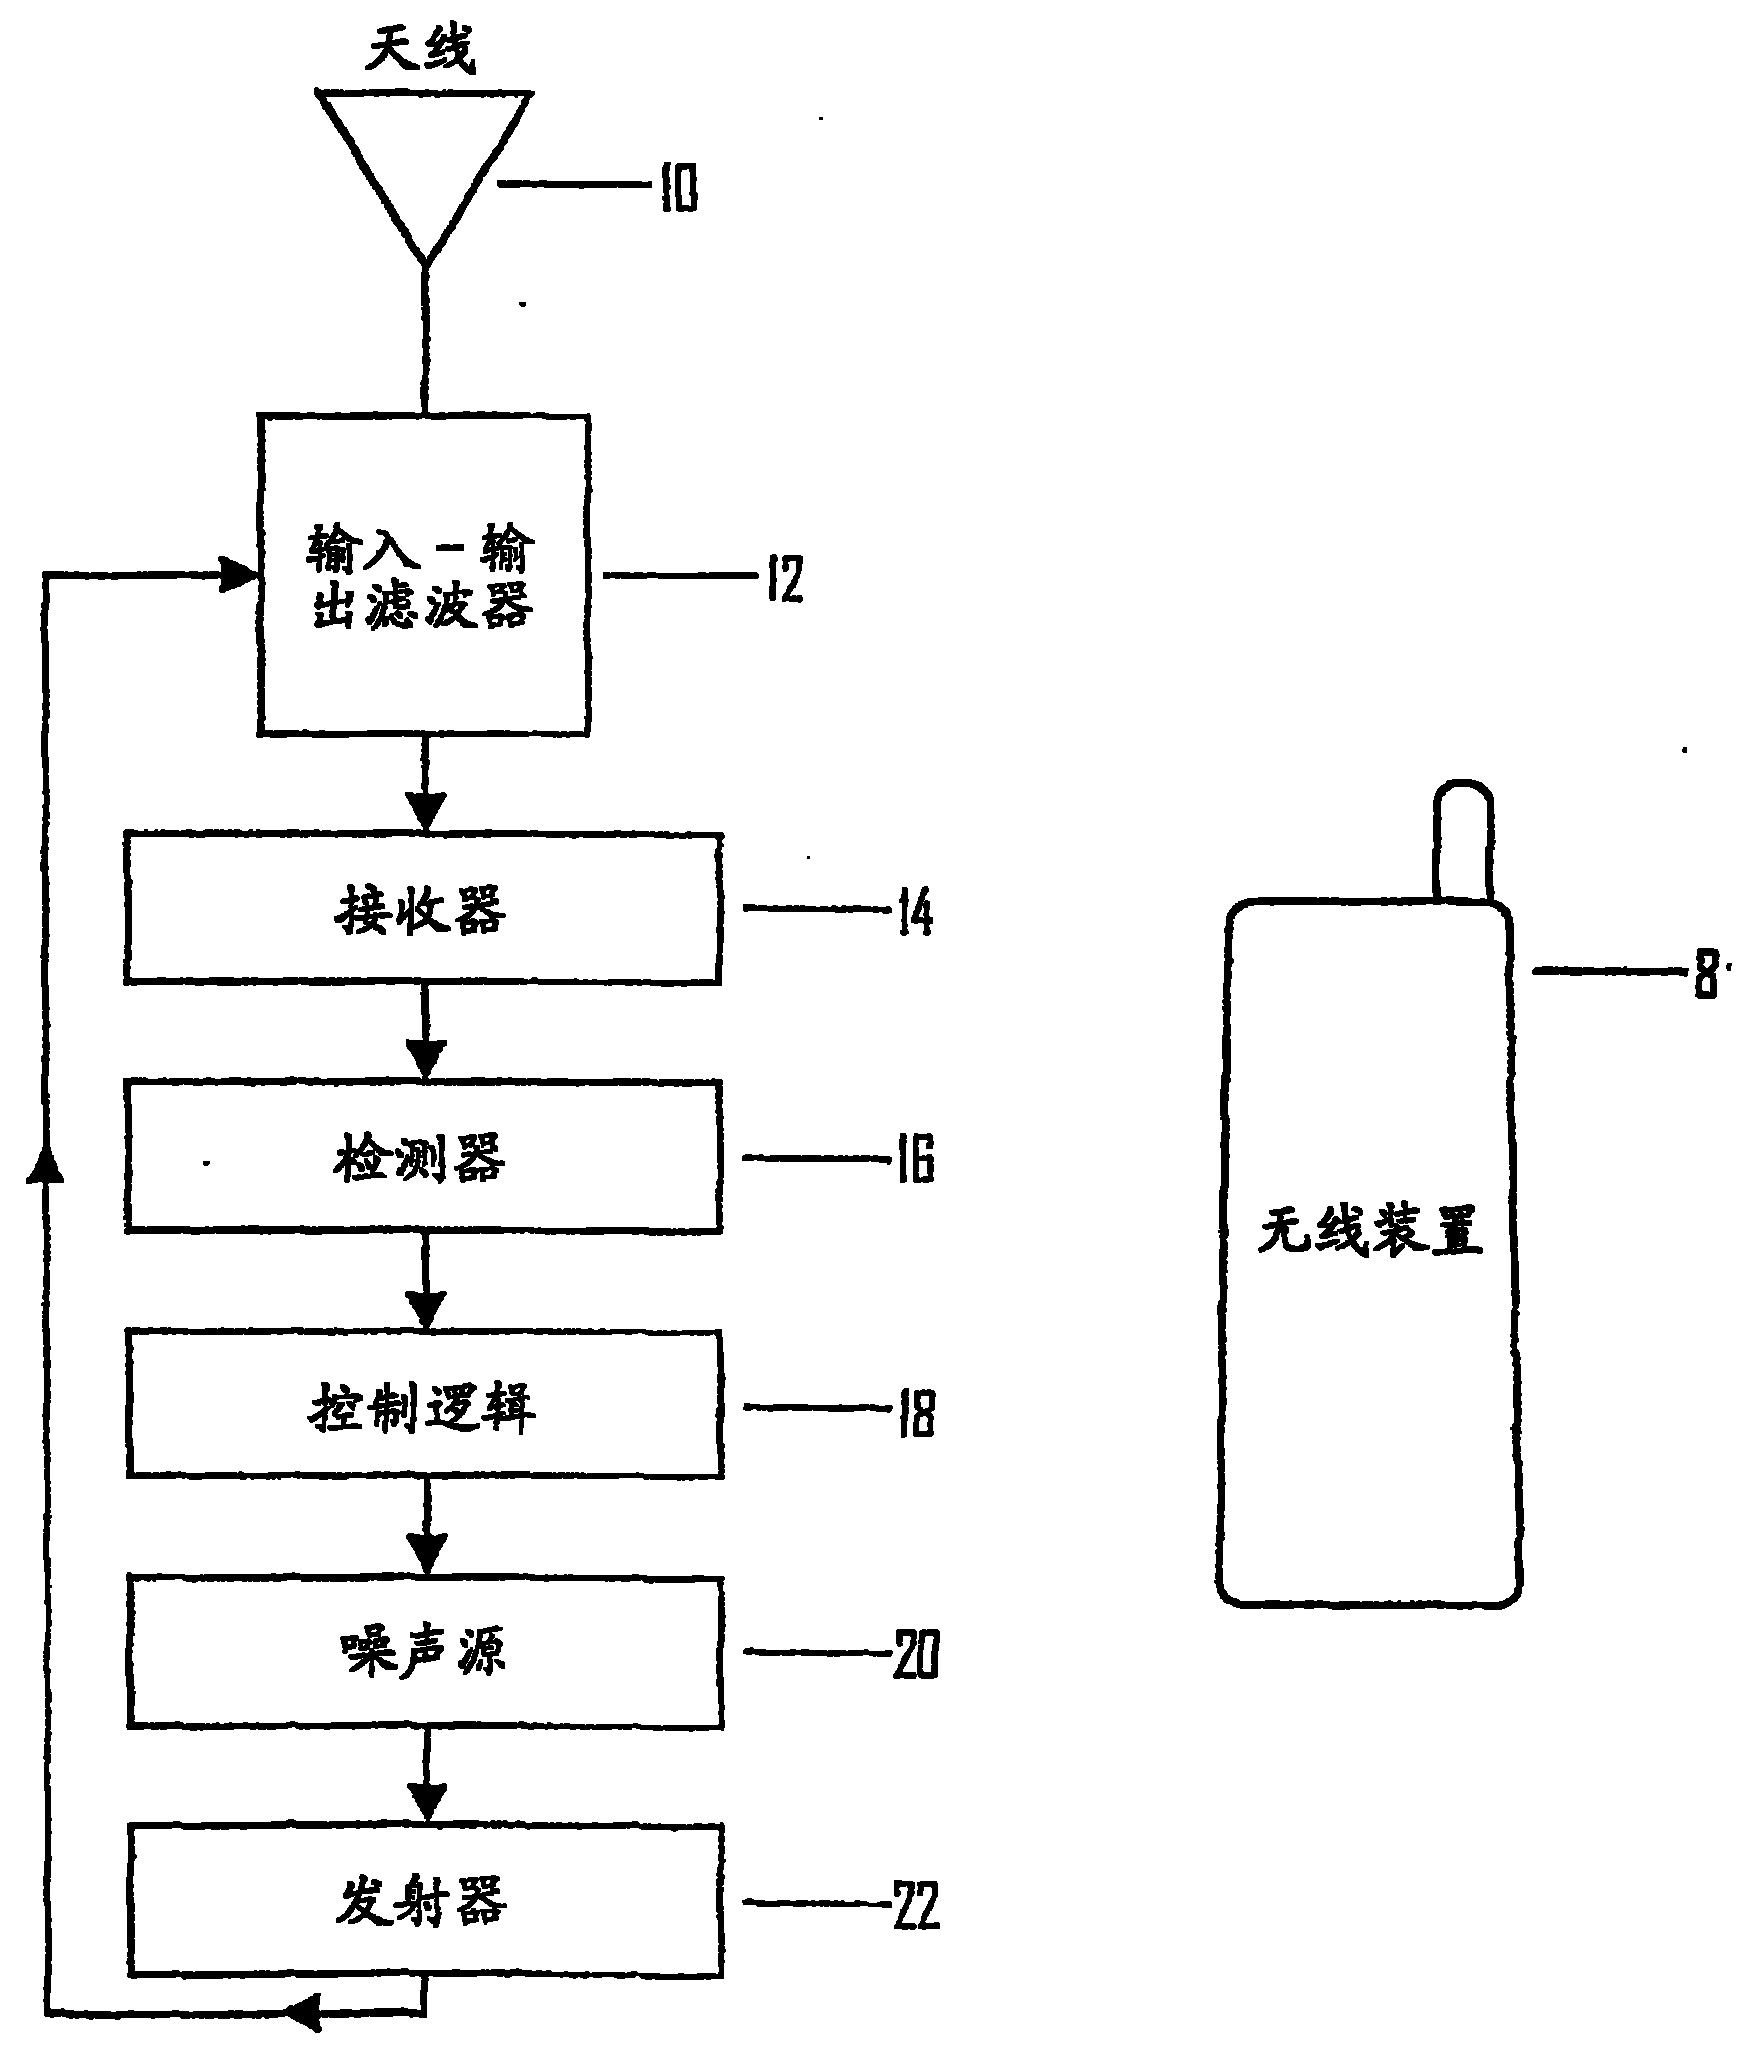 Use controlling system for a wireless communication device